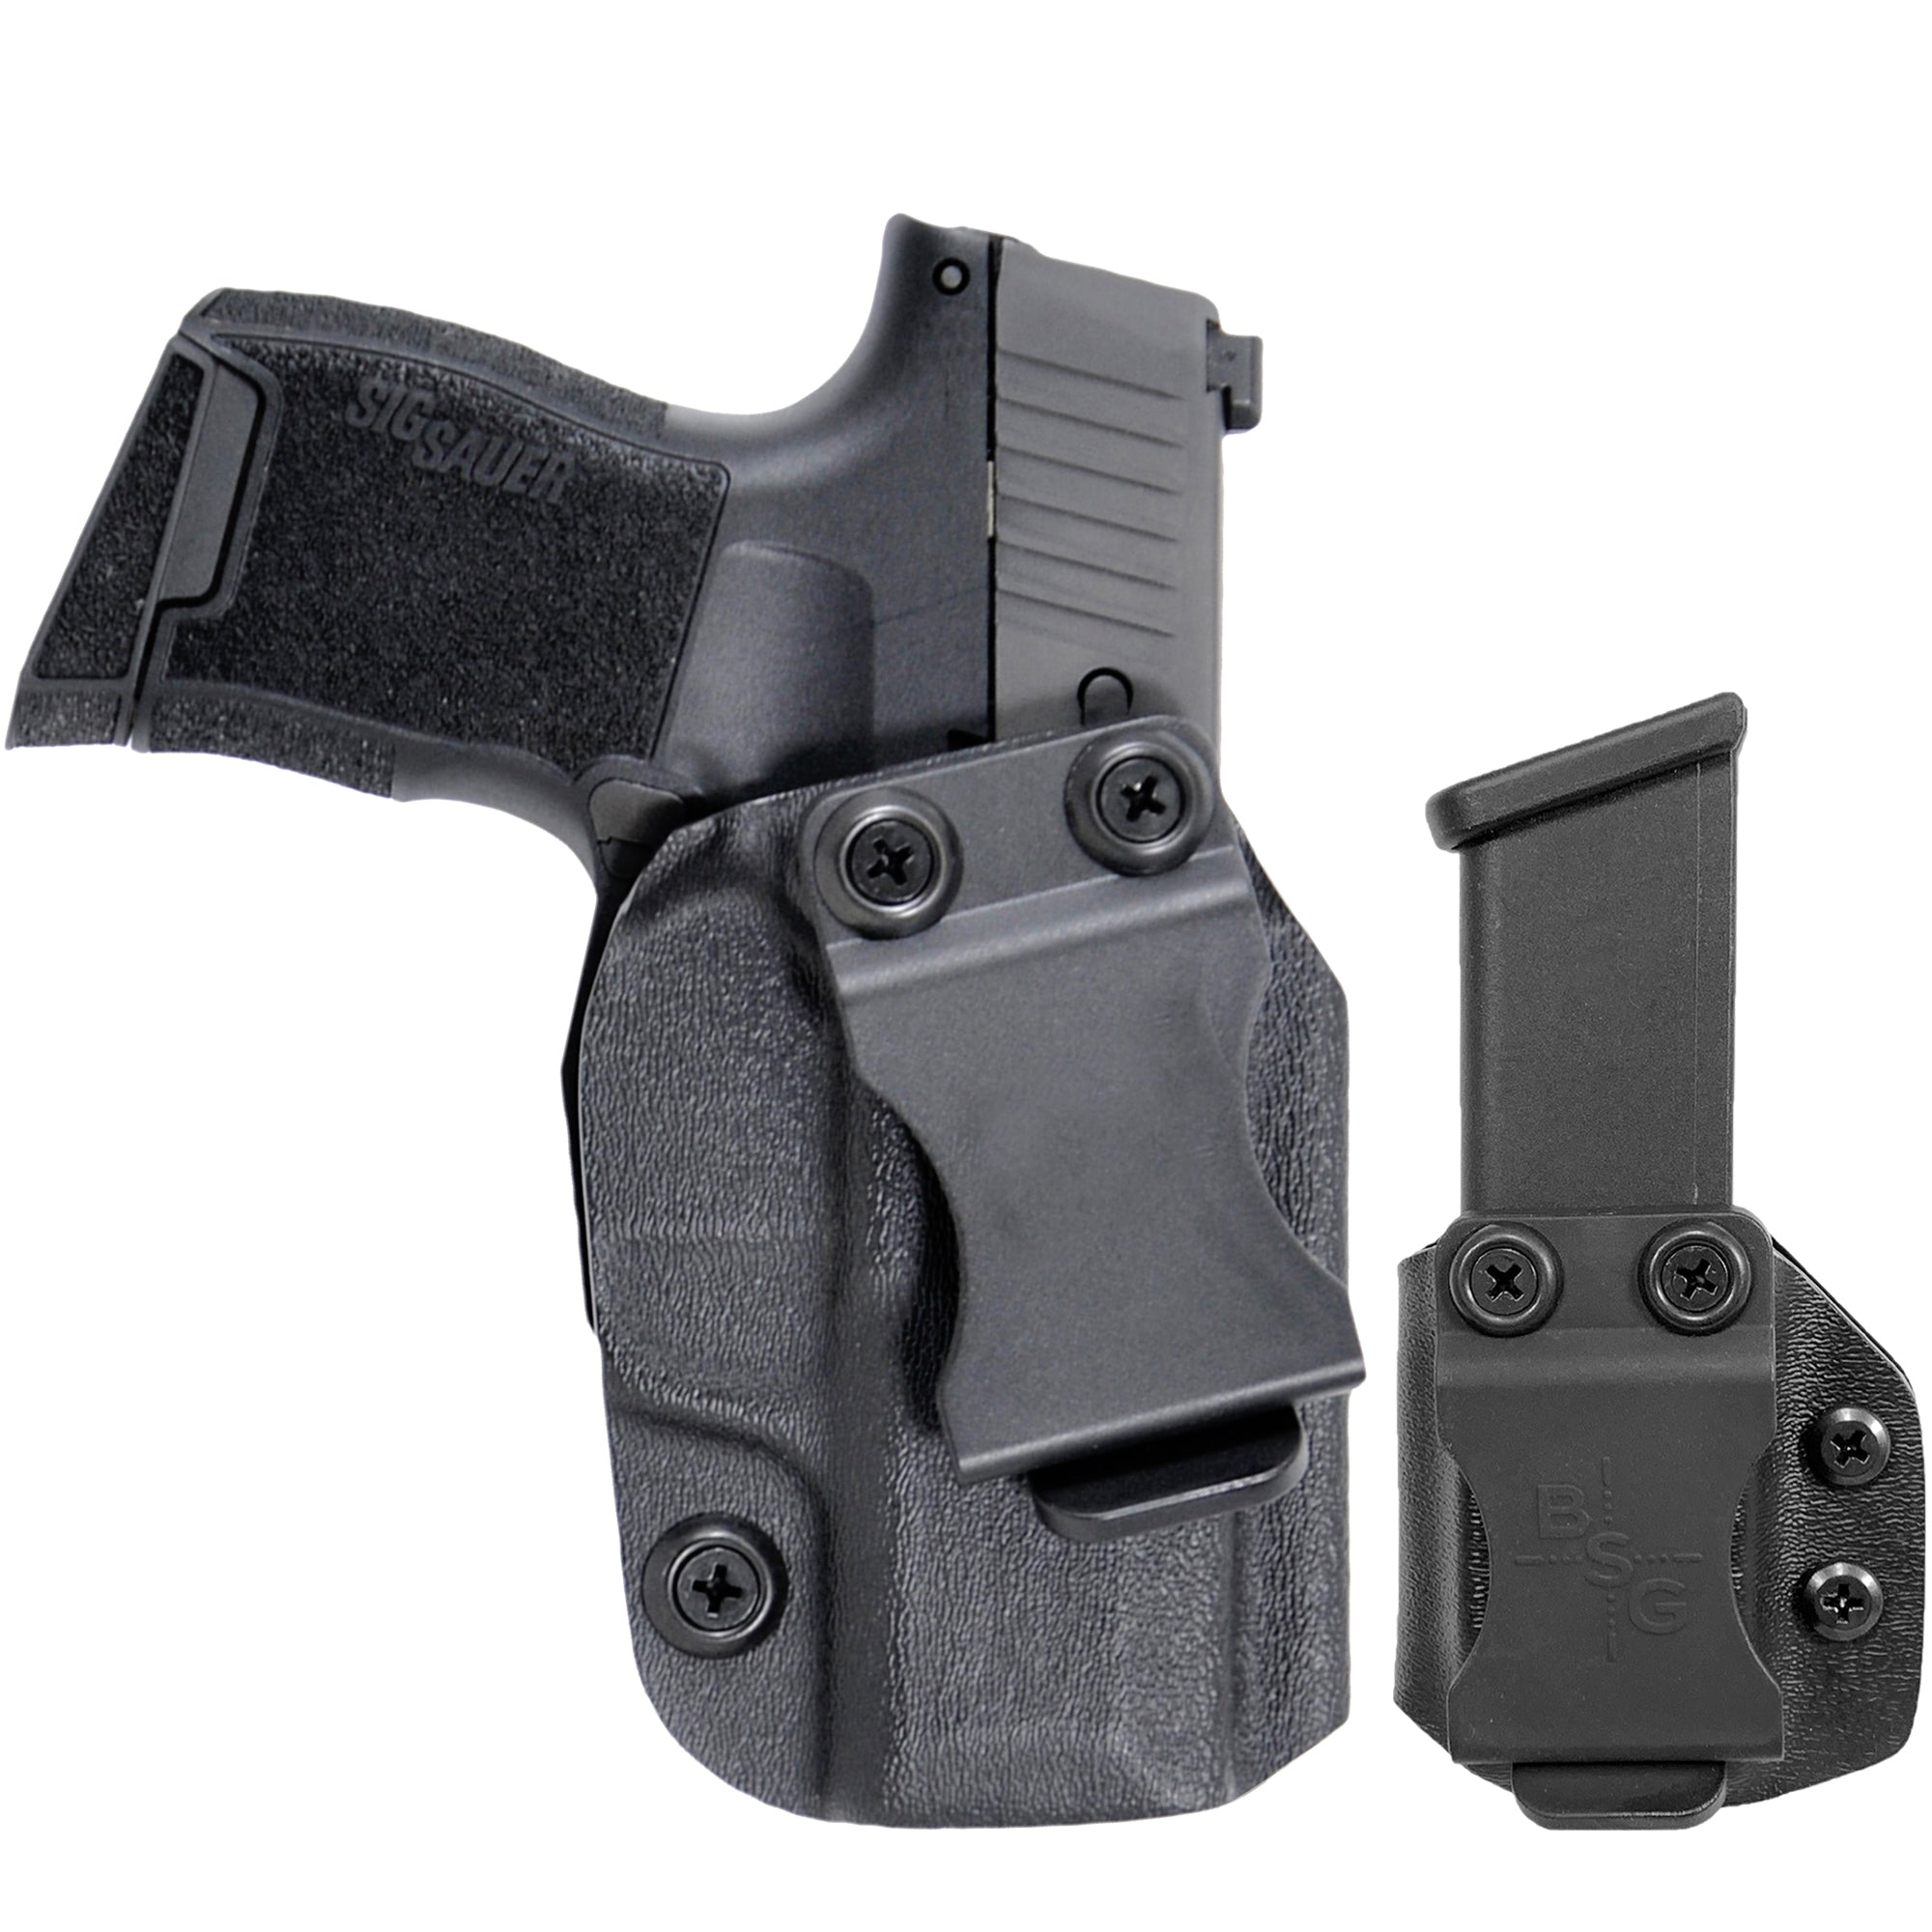 Sig Sauer P365 IWB Kydex Holster & Mag Pouch Combo